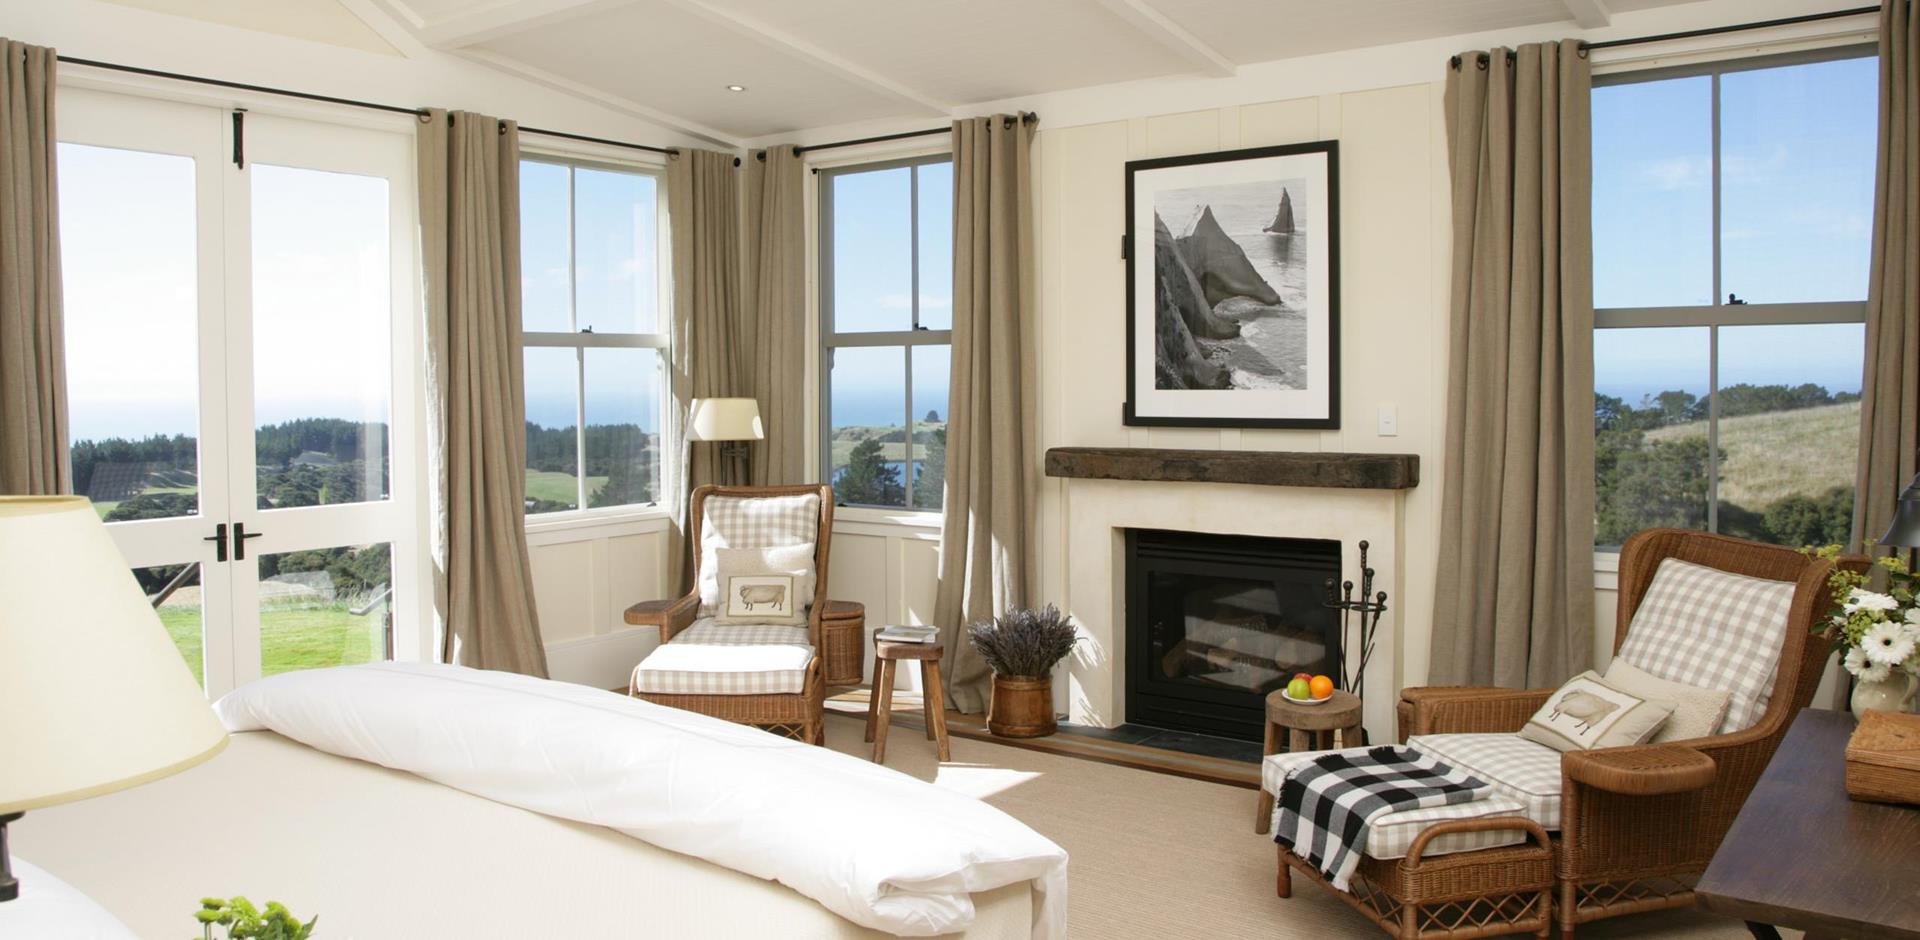 Bedroom, The Farm at Cape Kidnappers, New Zealand